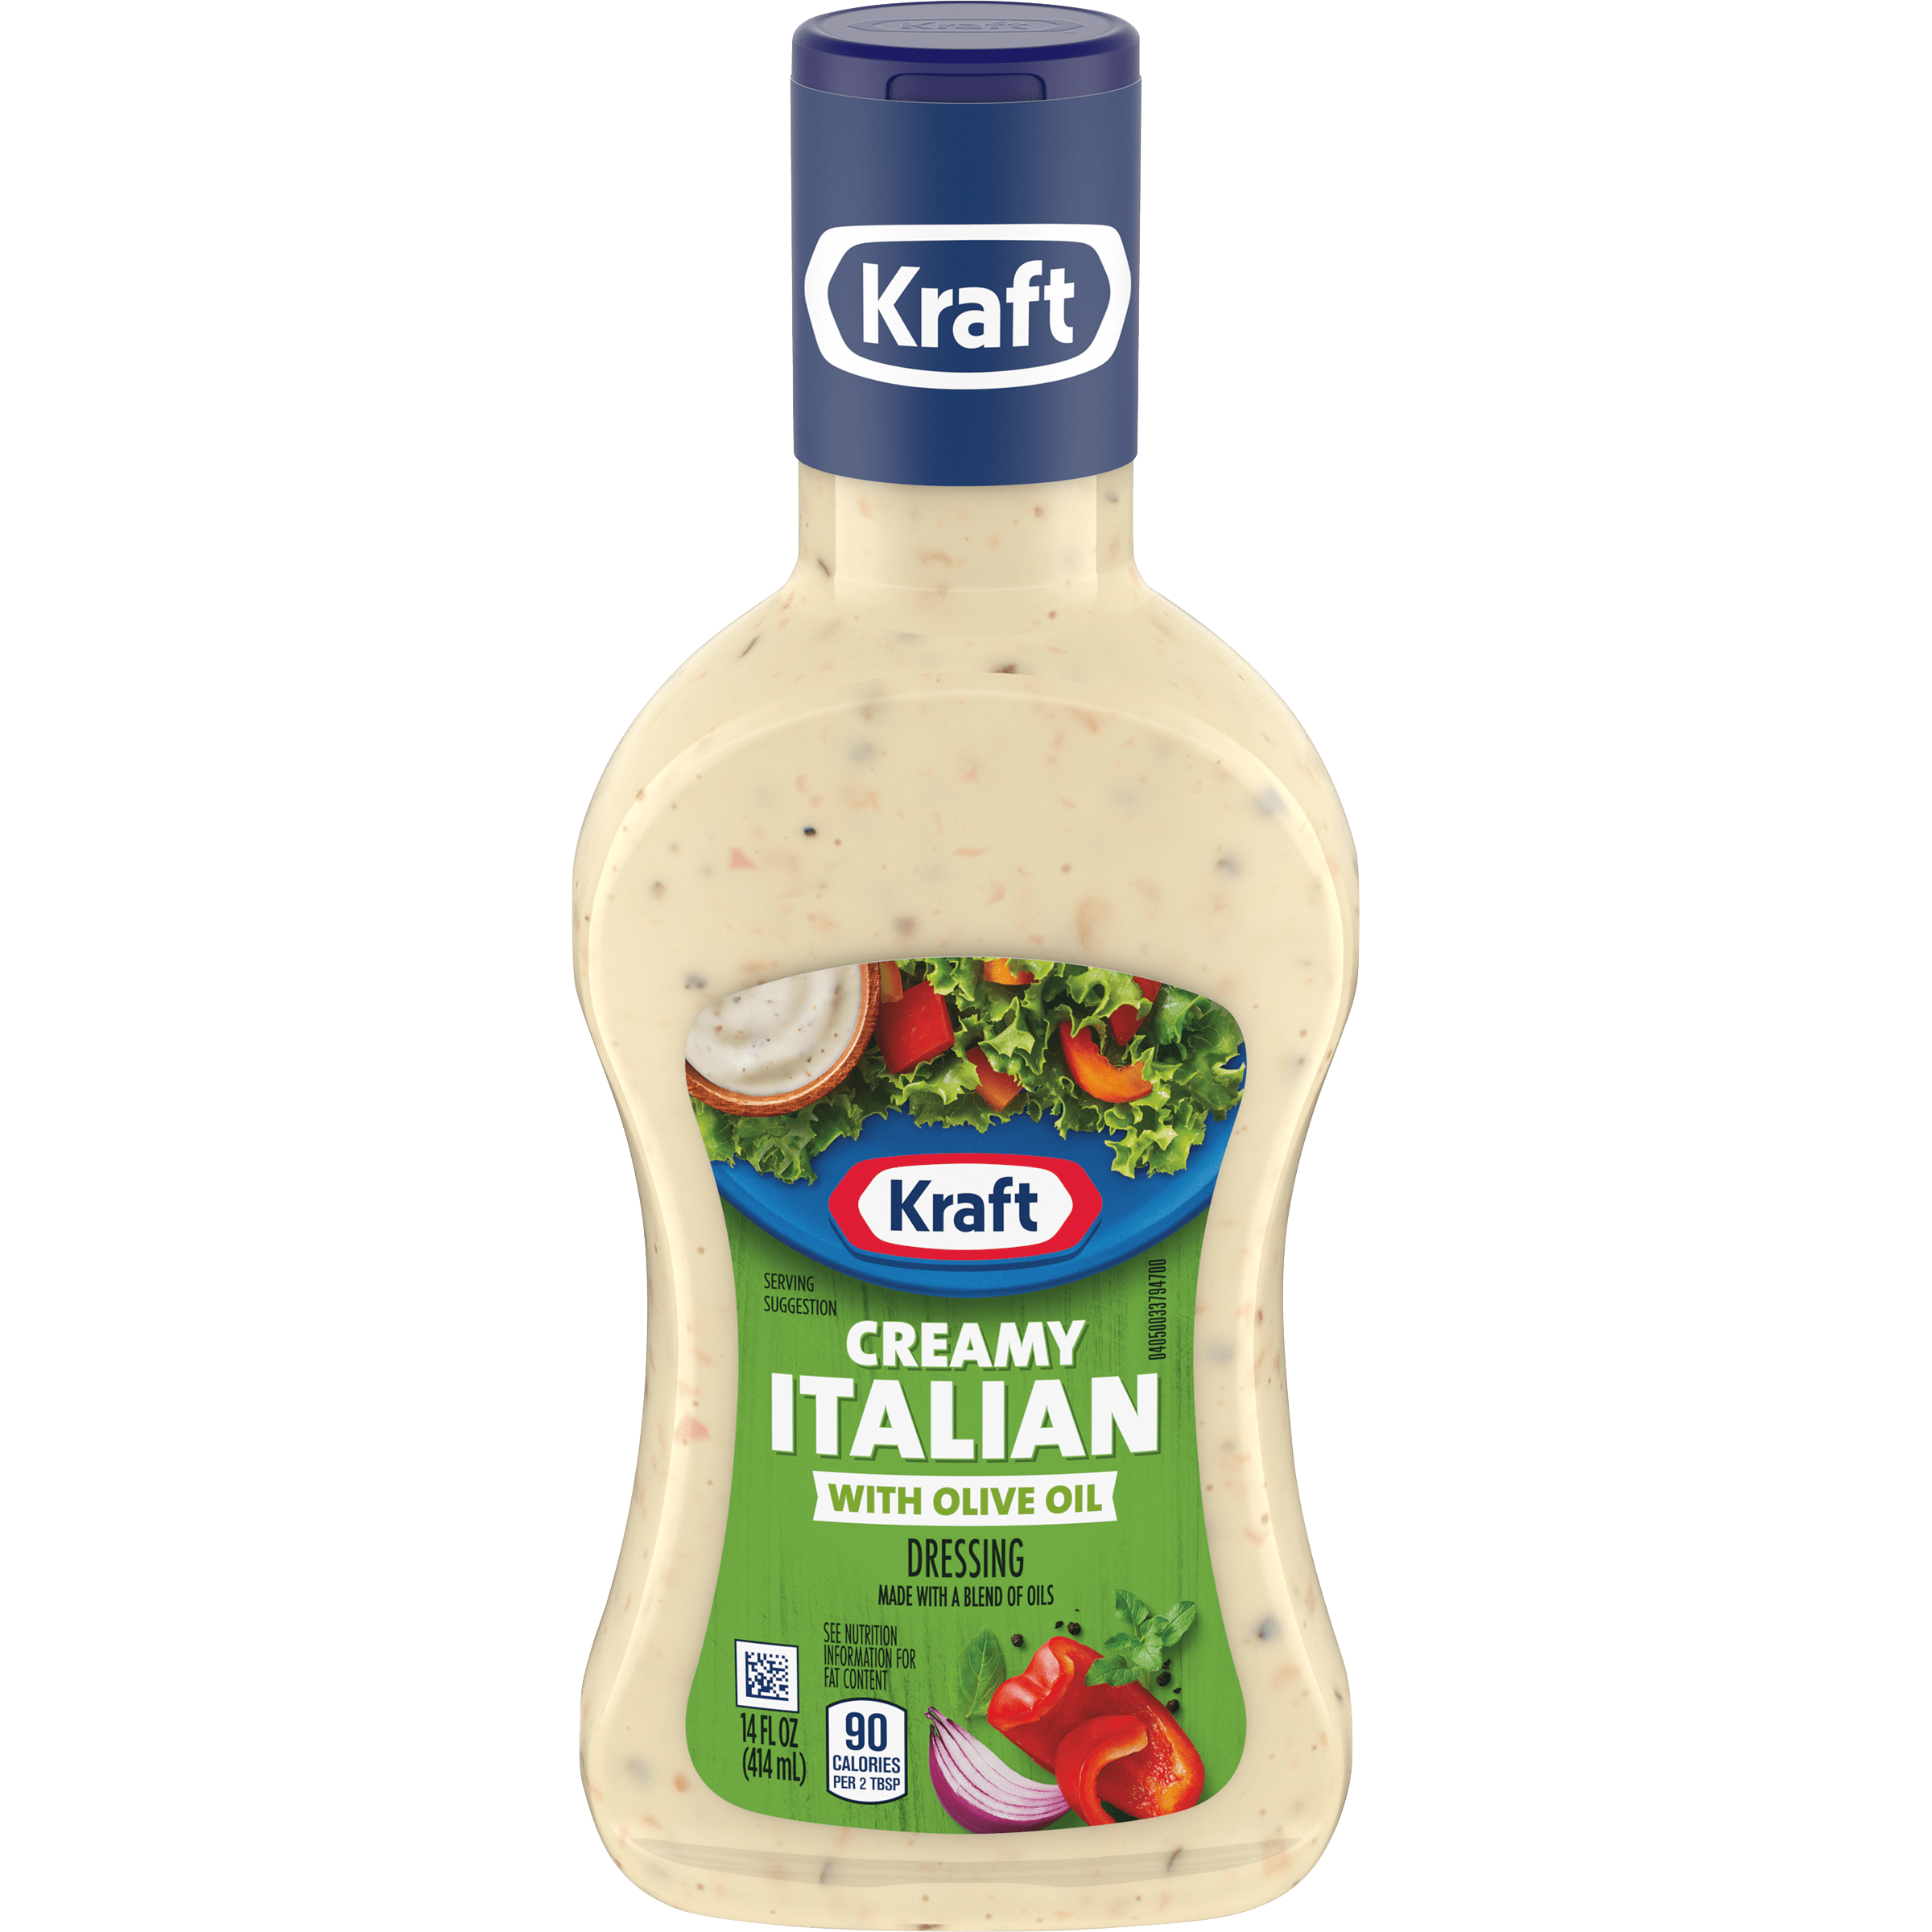 Creamy Italian Salad Dressing with Olive Oil